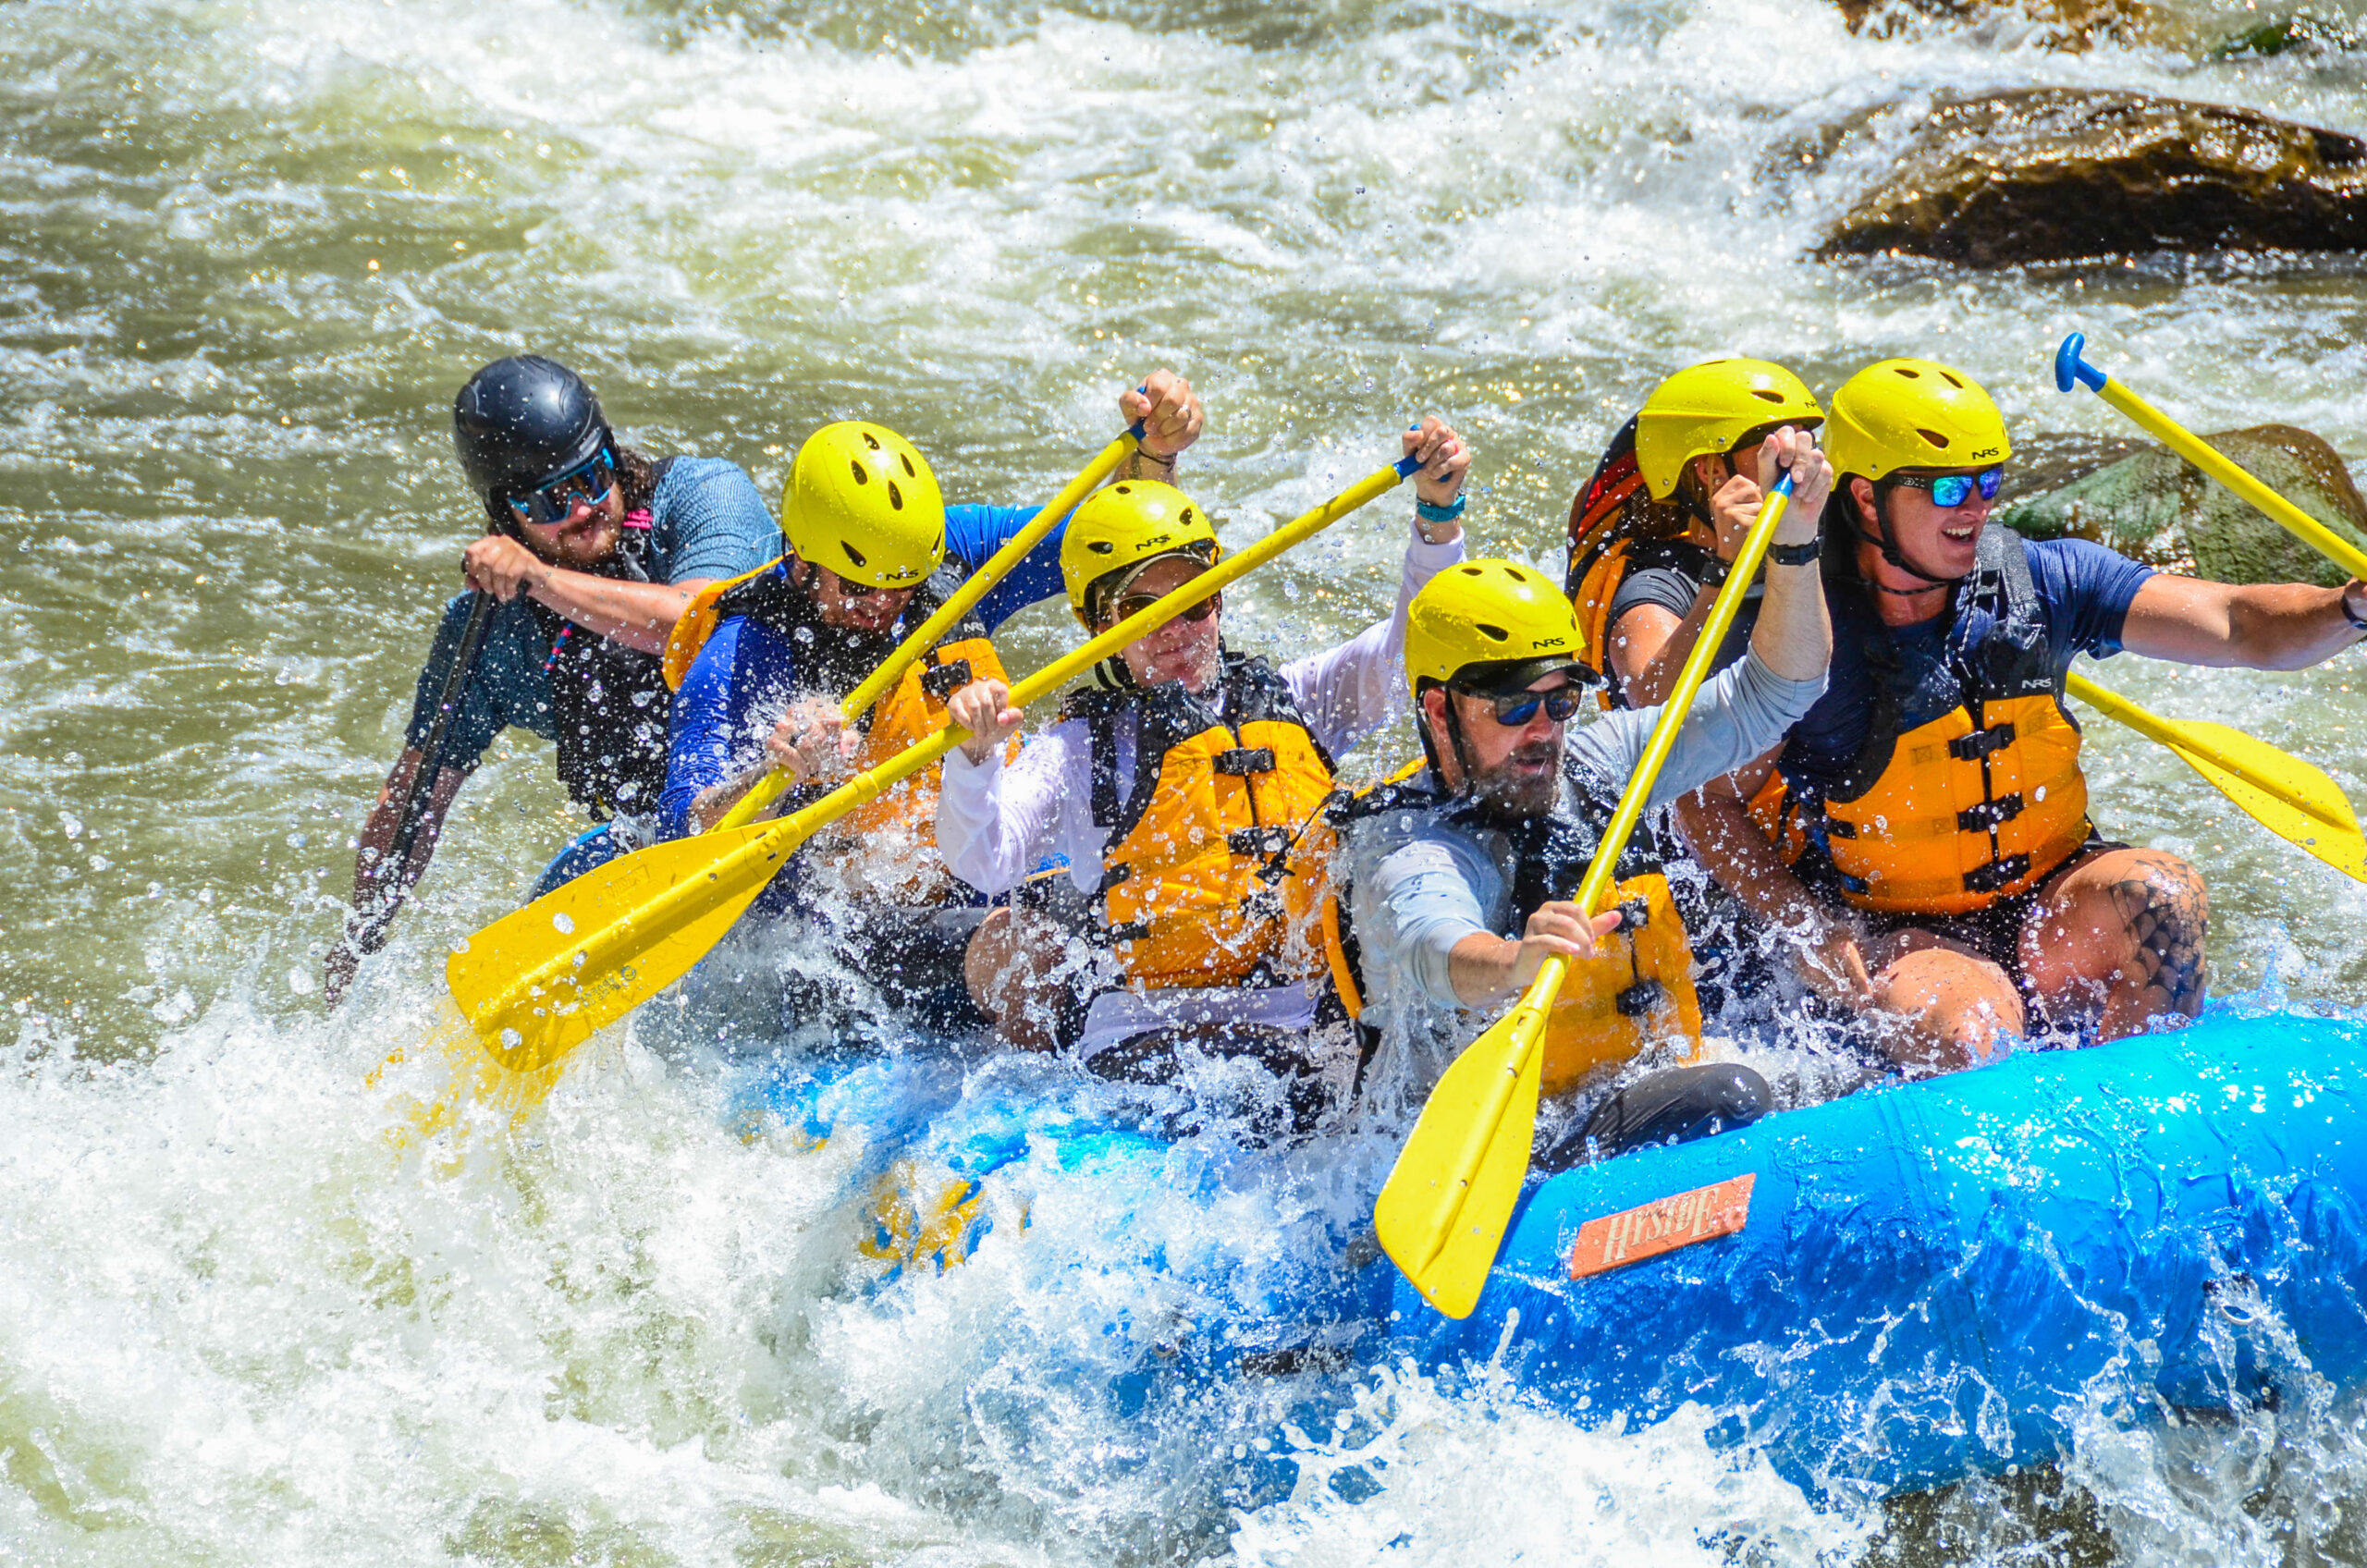 In this compelling image, a proficient guide expertly directs a fully occupied boat from the rear as participants paddle through the whitewater together. Cloaked in life jackets and helmets, the group showcases seamless teamwork, with water splashing around them, capturing the dynamic and exhilarating essence of their adventure.